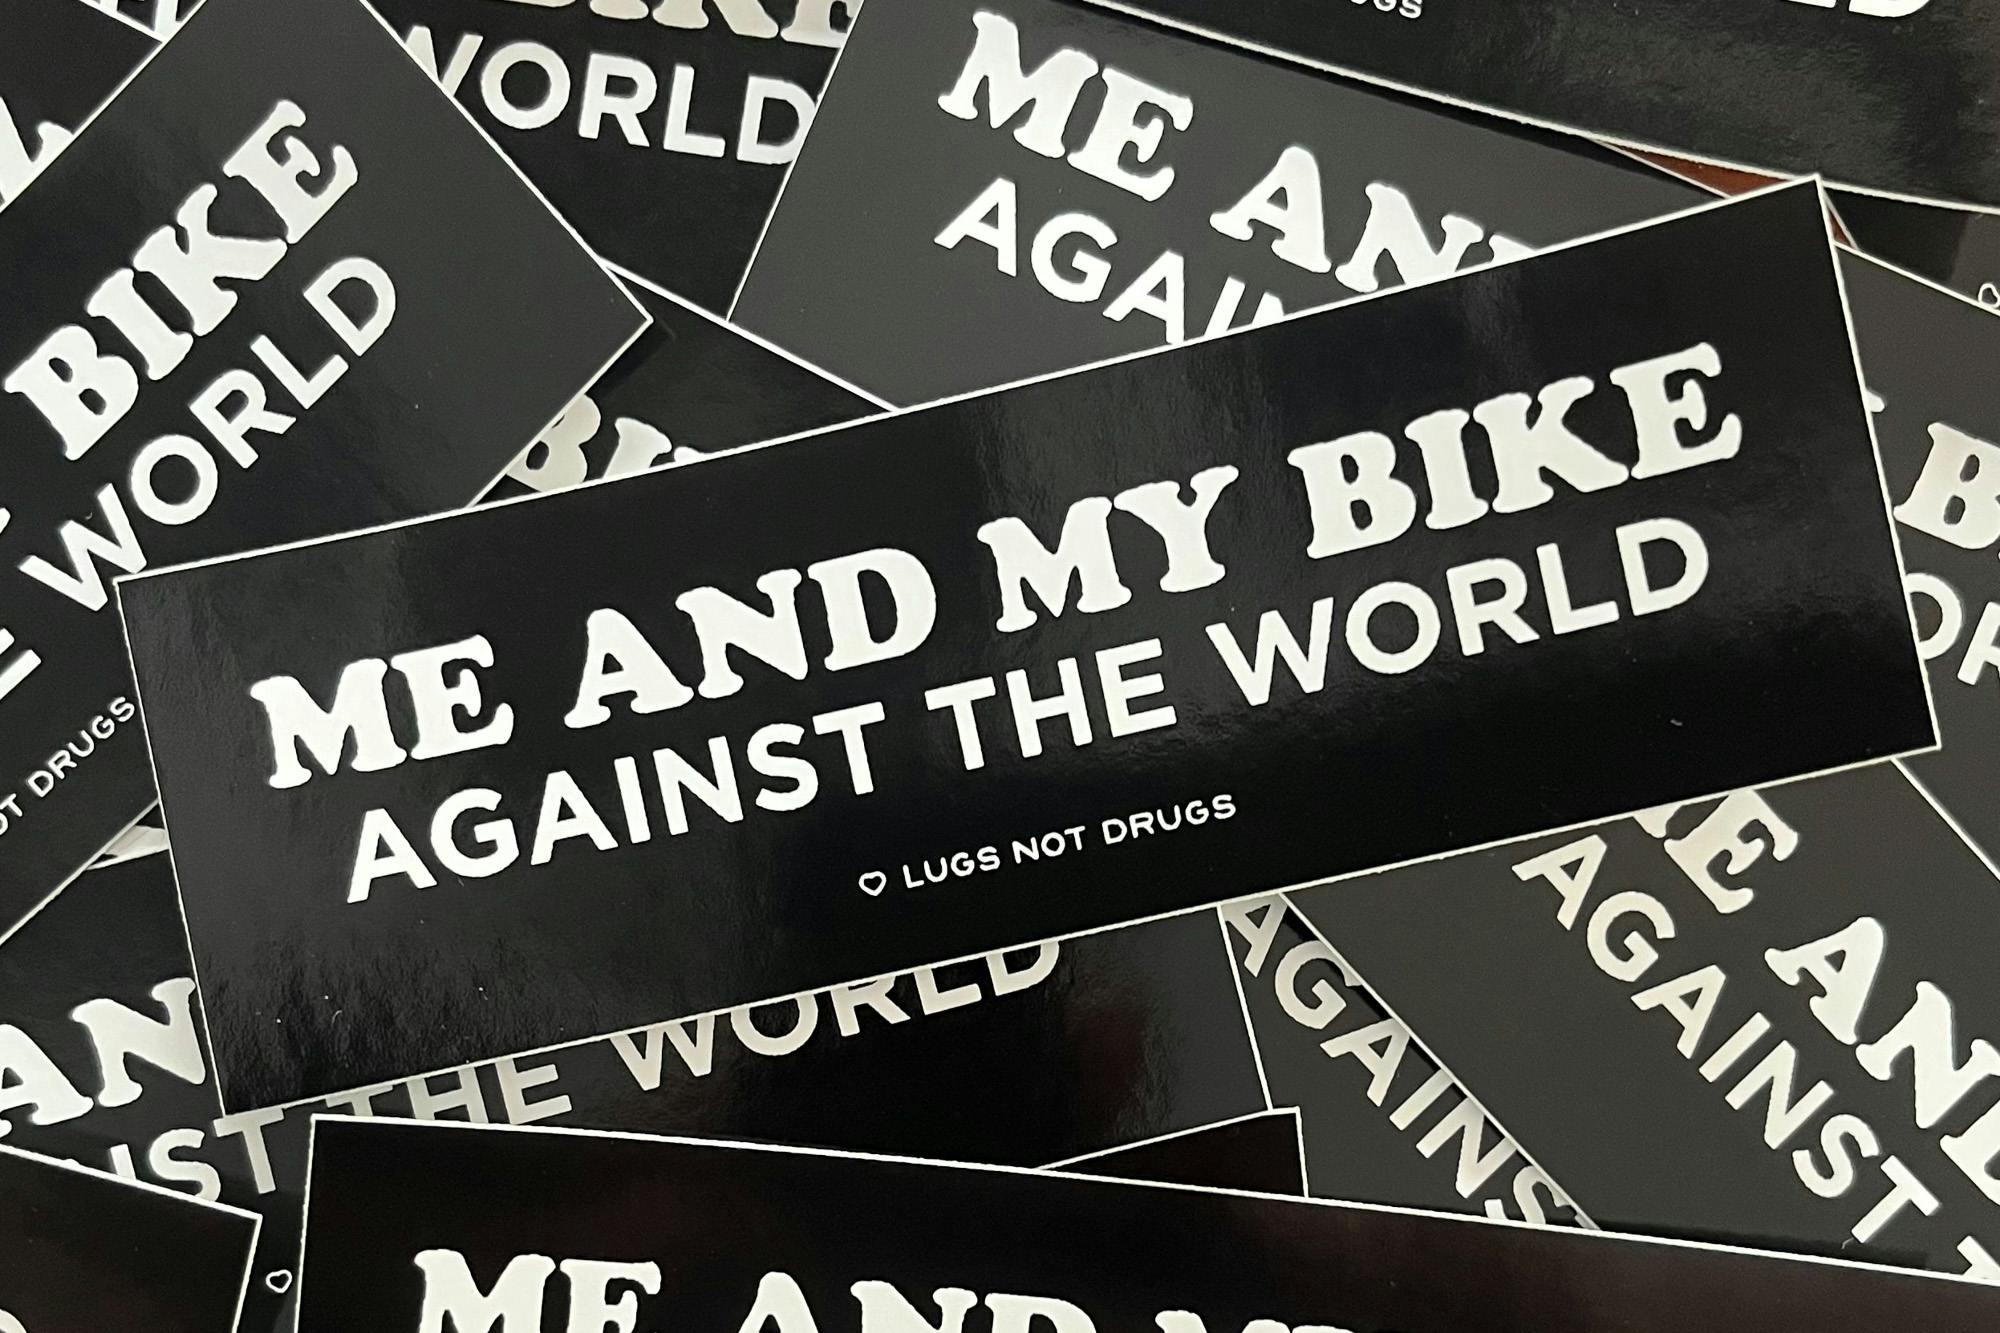 Me and my bike against the world sticker.